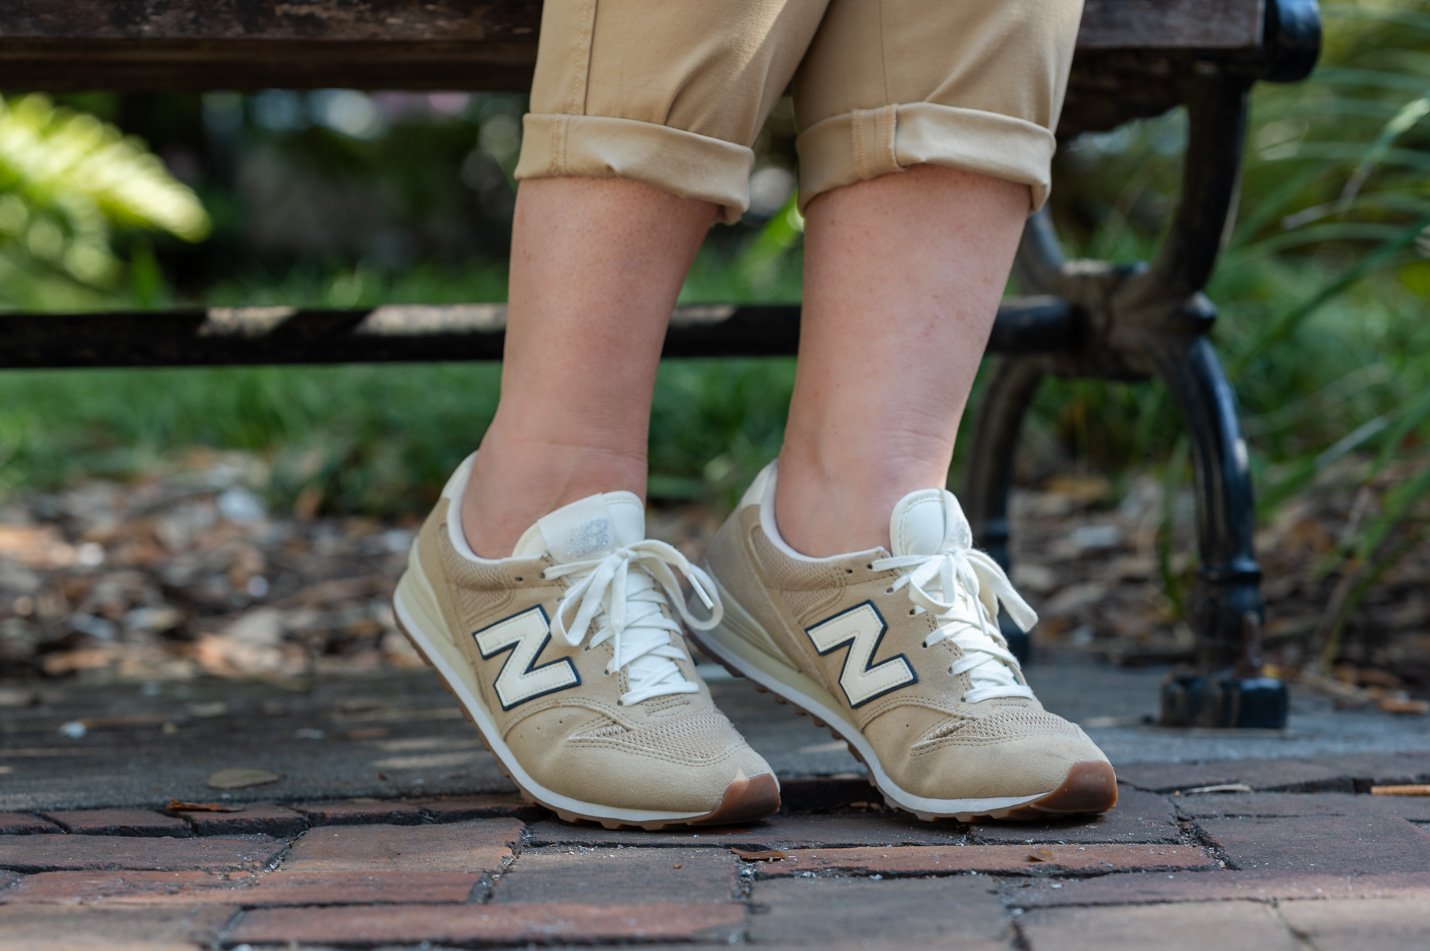 New Balance by J. Crew Sneakers